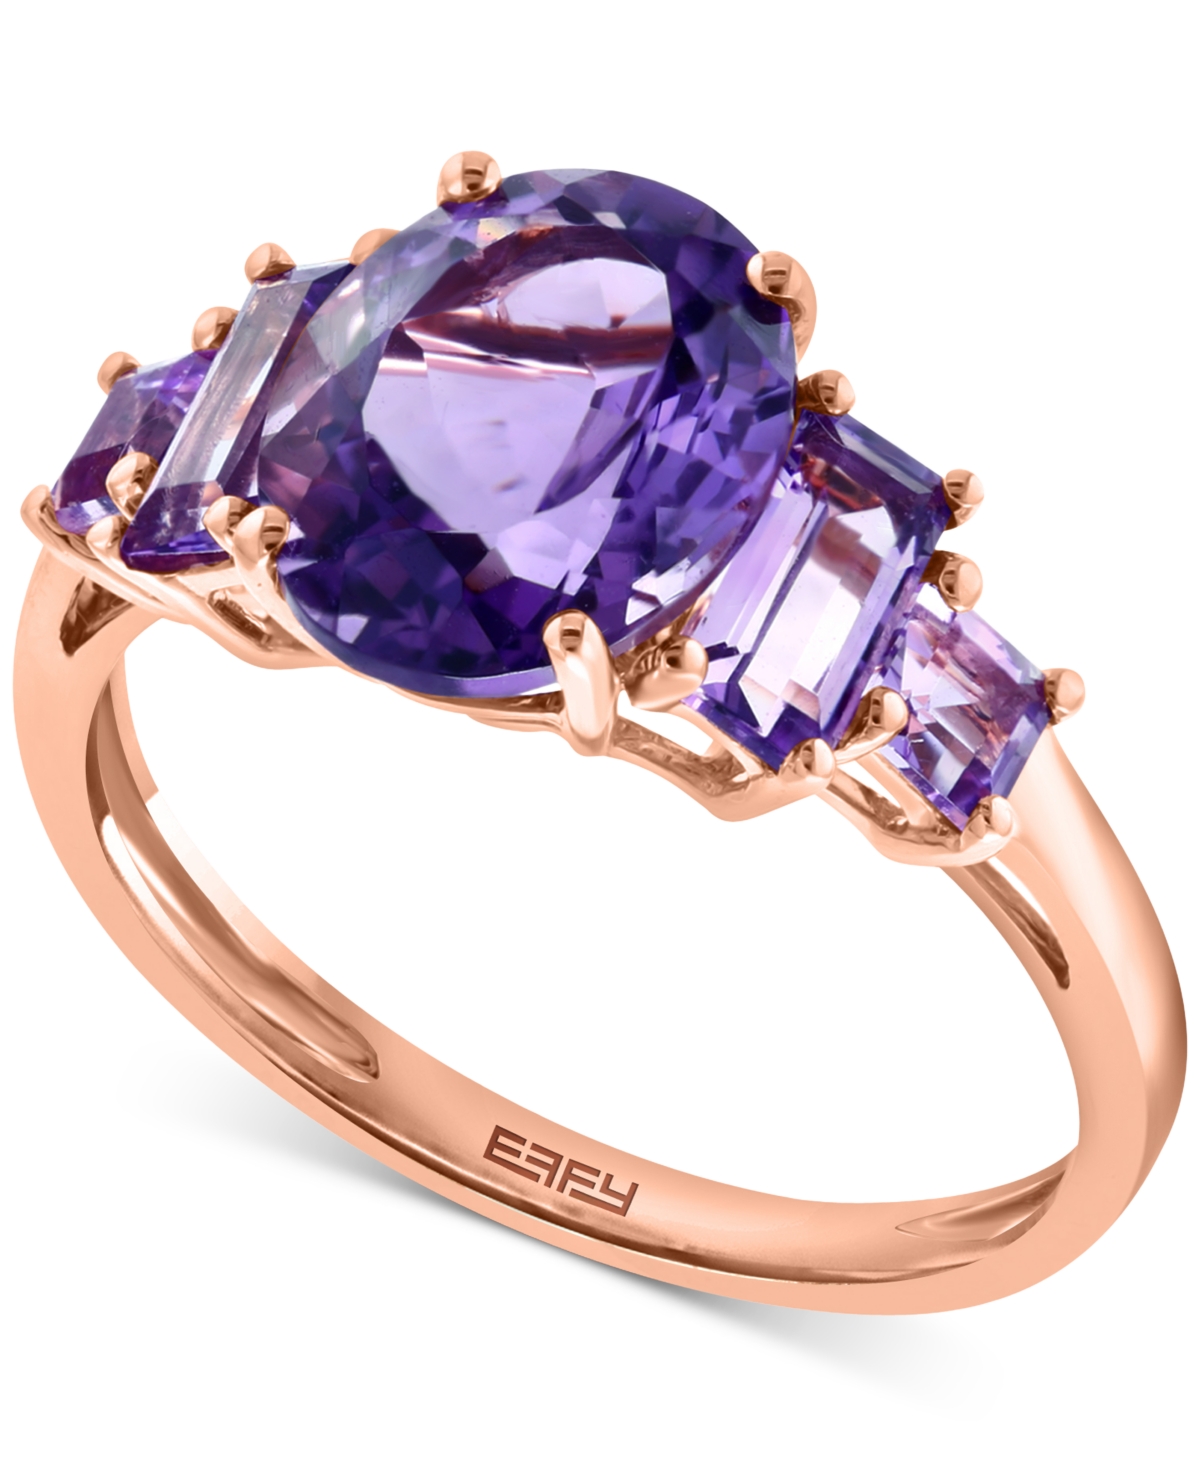 Effy Collection Effy Amethyst Multi-Stone Ring (3-1/2 ct. t.w.) Ring in 14k Rose Gold